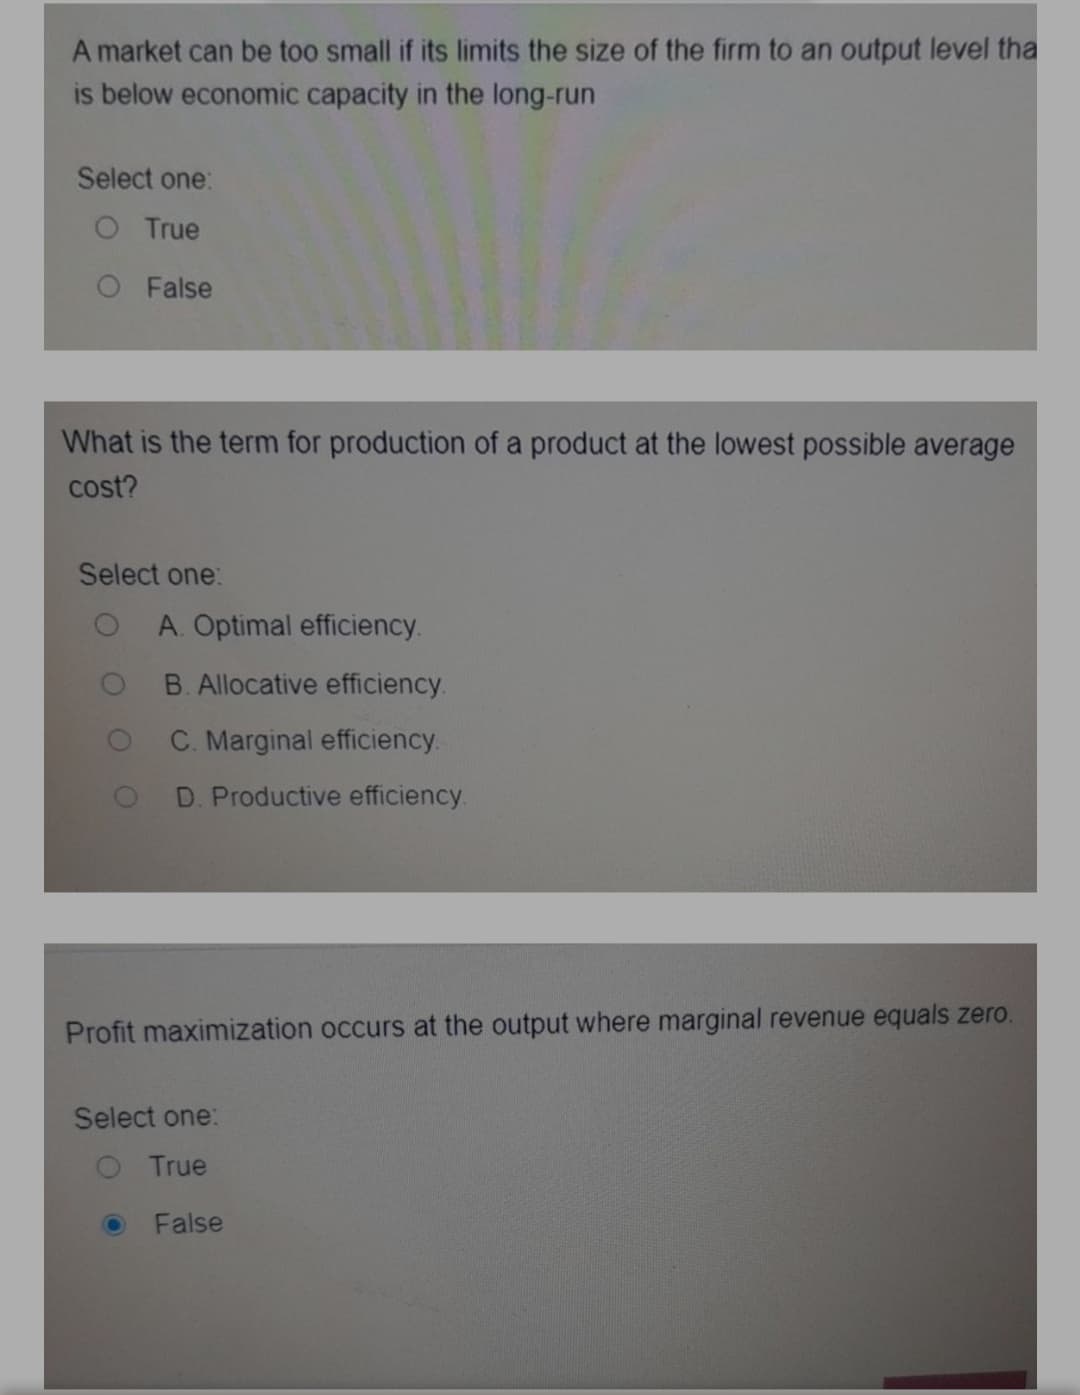 A market can be too small if its limits the size of the firm to an output level tha
is below economic capacity in the long-run
Select one:
O True
O False
What is the term for production of a product at the lowest possible average
cost?
Select one:
A. Optimal efficiency.
B. Allocative efficiency.
C. Marginal efficiency.
D. Productive efficiency.
Profit maximization occurs at the output where marginal revenue equals zero.
Select one:
O True
False
